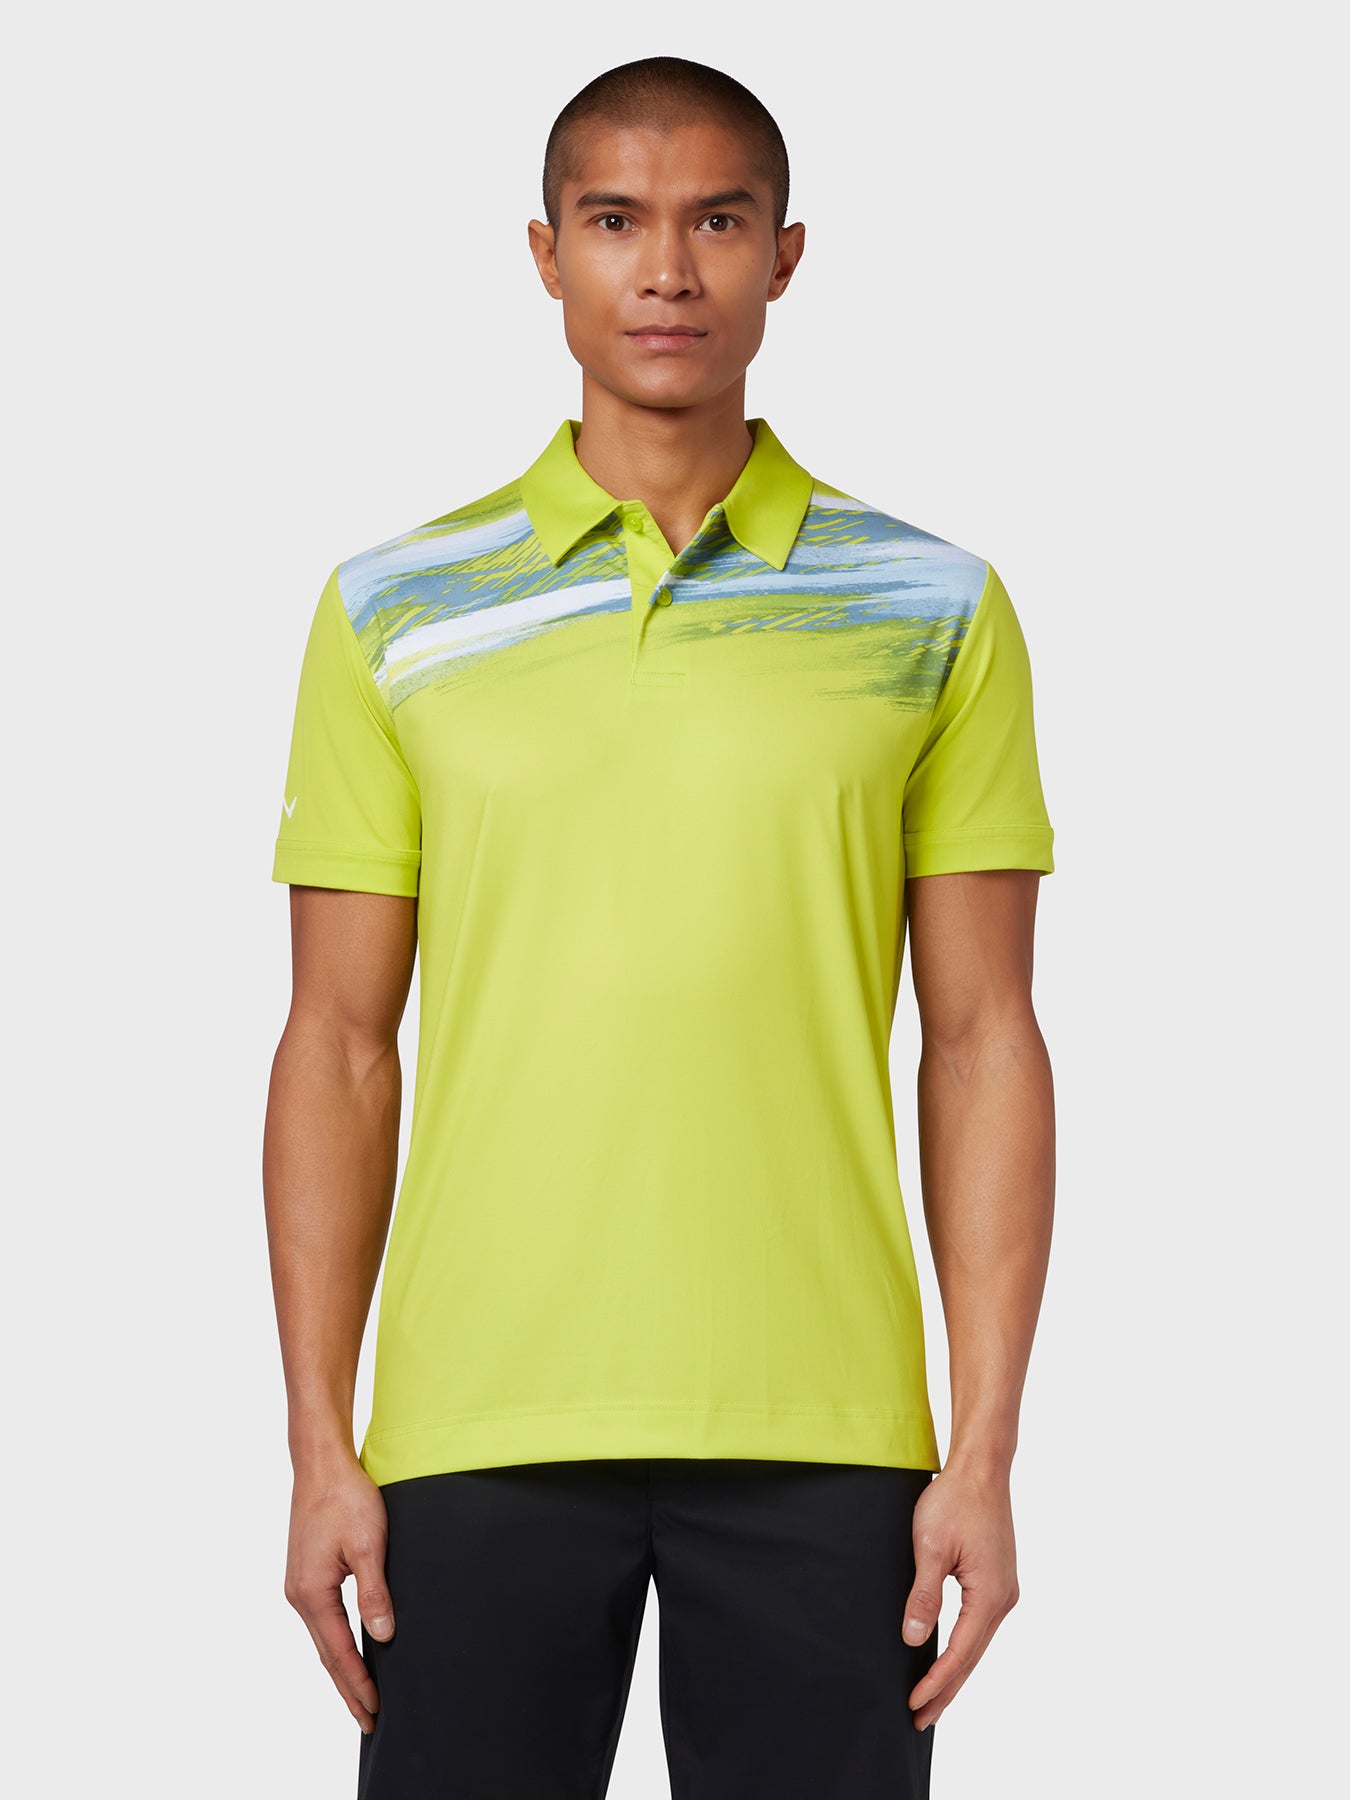 View X Series Active Textured Print Polo In Lime Punch Lime Punch M information